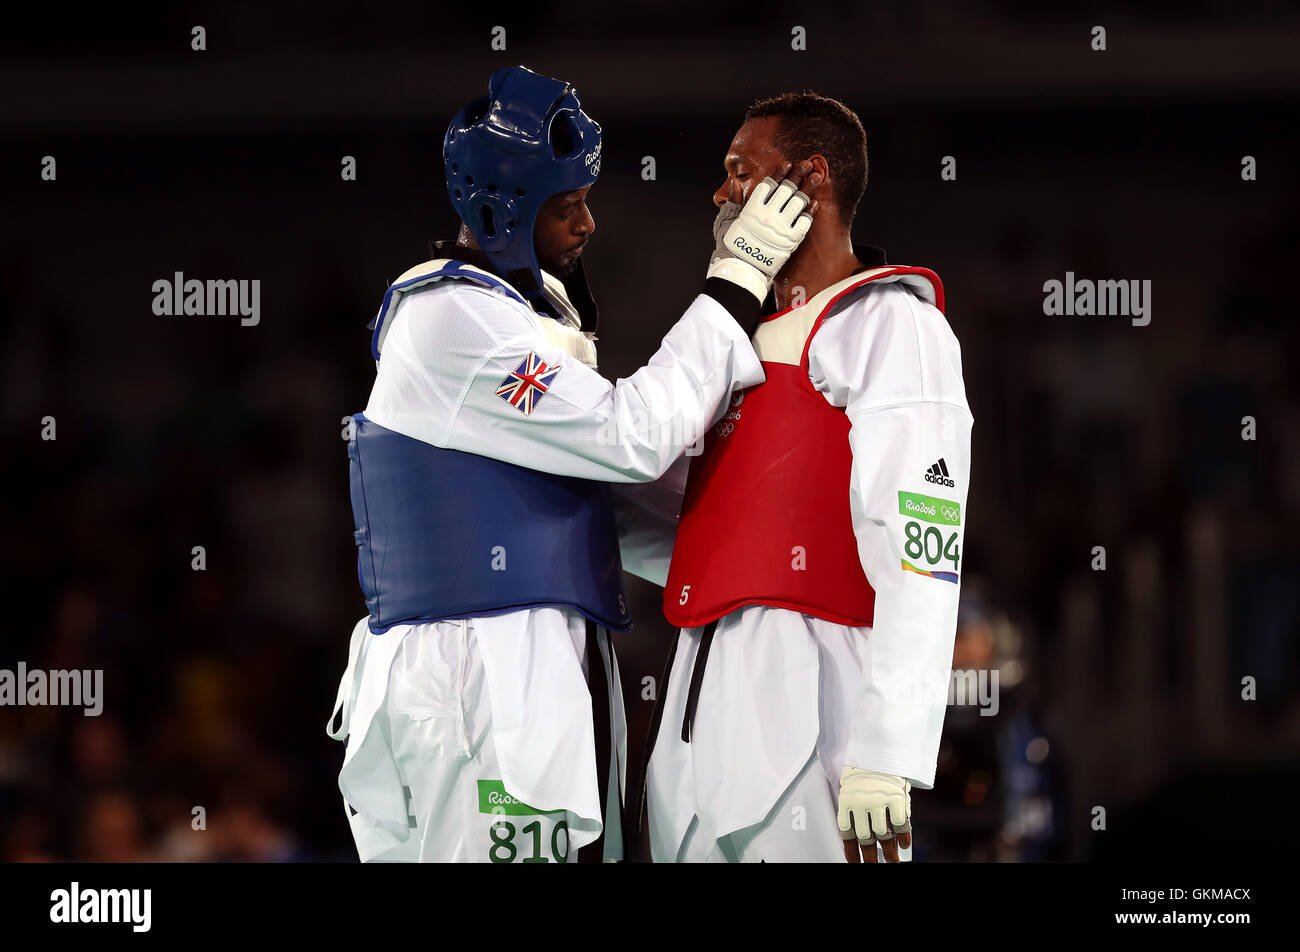 Brazil's Maicon Siqueira (right) and Great Britain's Mahama Cho after the Men's +80kg Taekwondo Bronze medal match at Carioca Arena 3 on the fifteenth day of the Rio Olympic Games, Brazil. Stock Photo